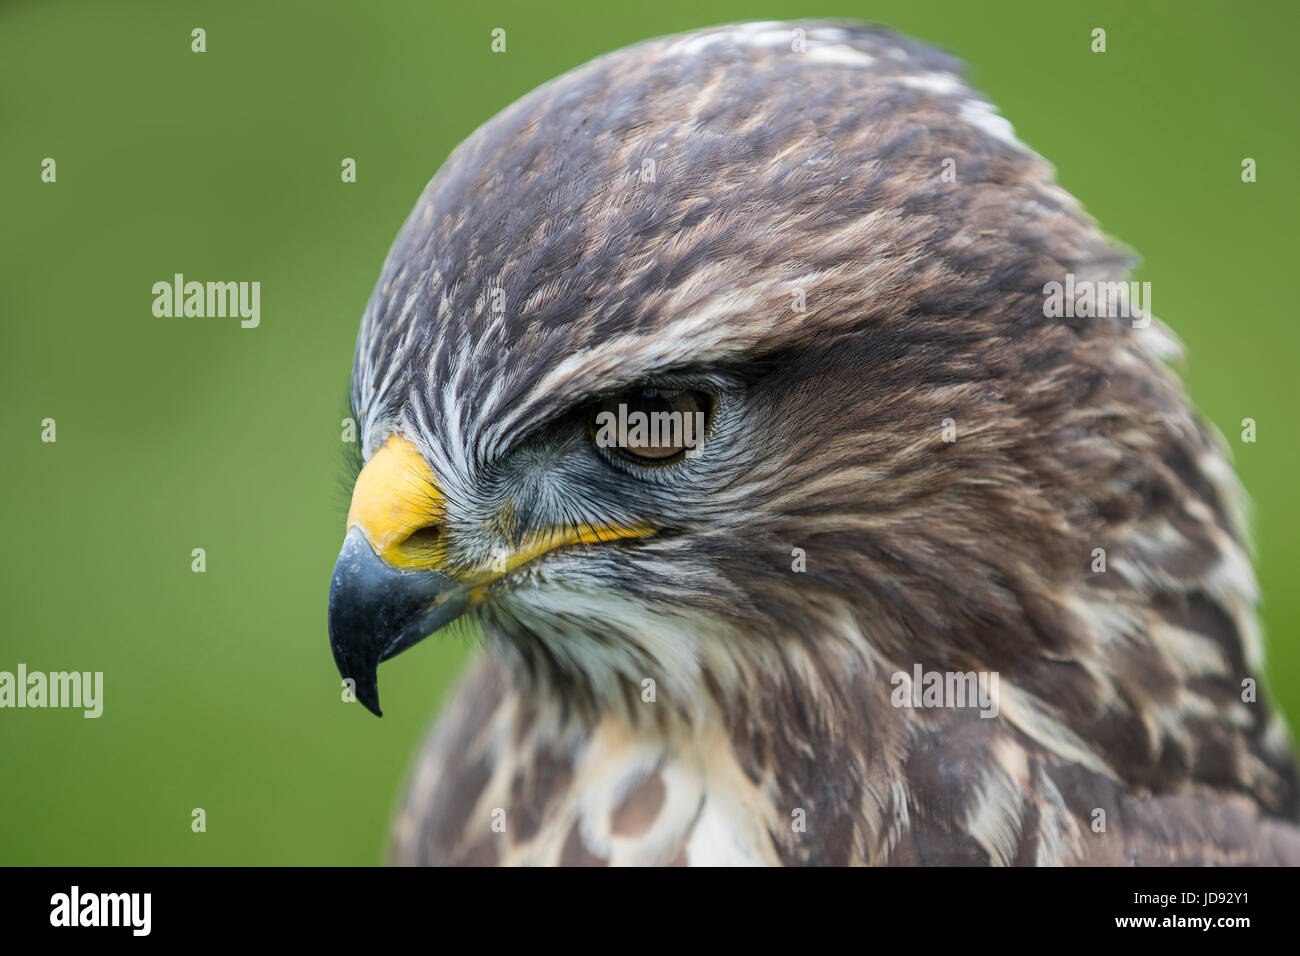 This Buzzard was watching some Prey on the Ground Stock Photo